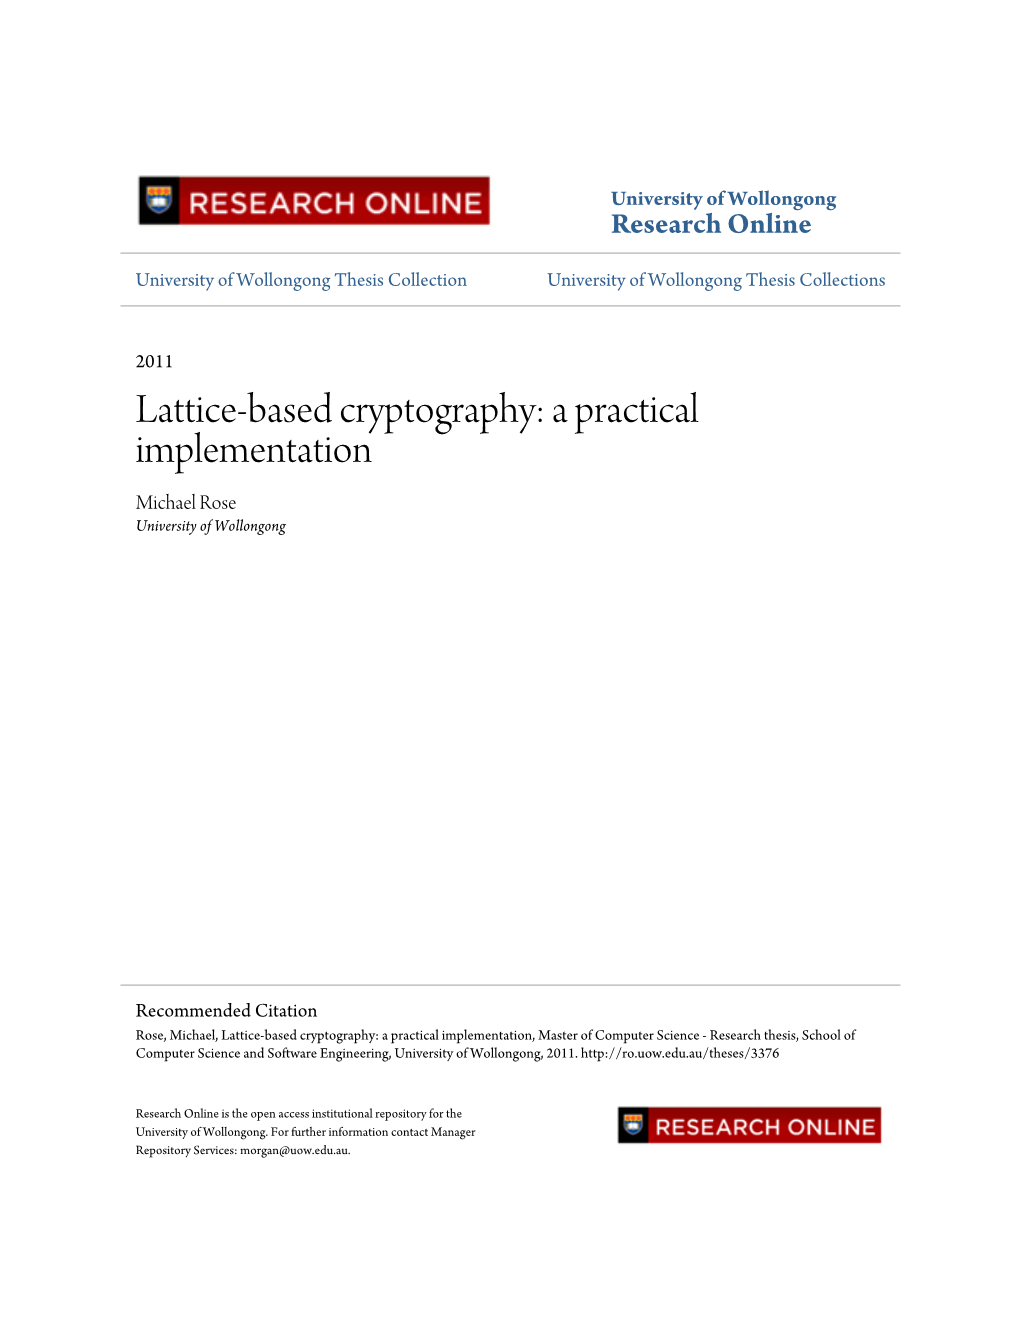 Lattice-Based Cryptography: a Practical Implementation Michael Rose University of Wollongong